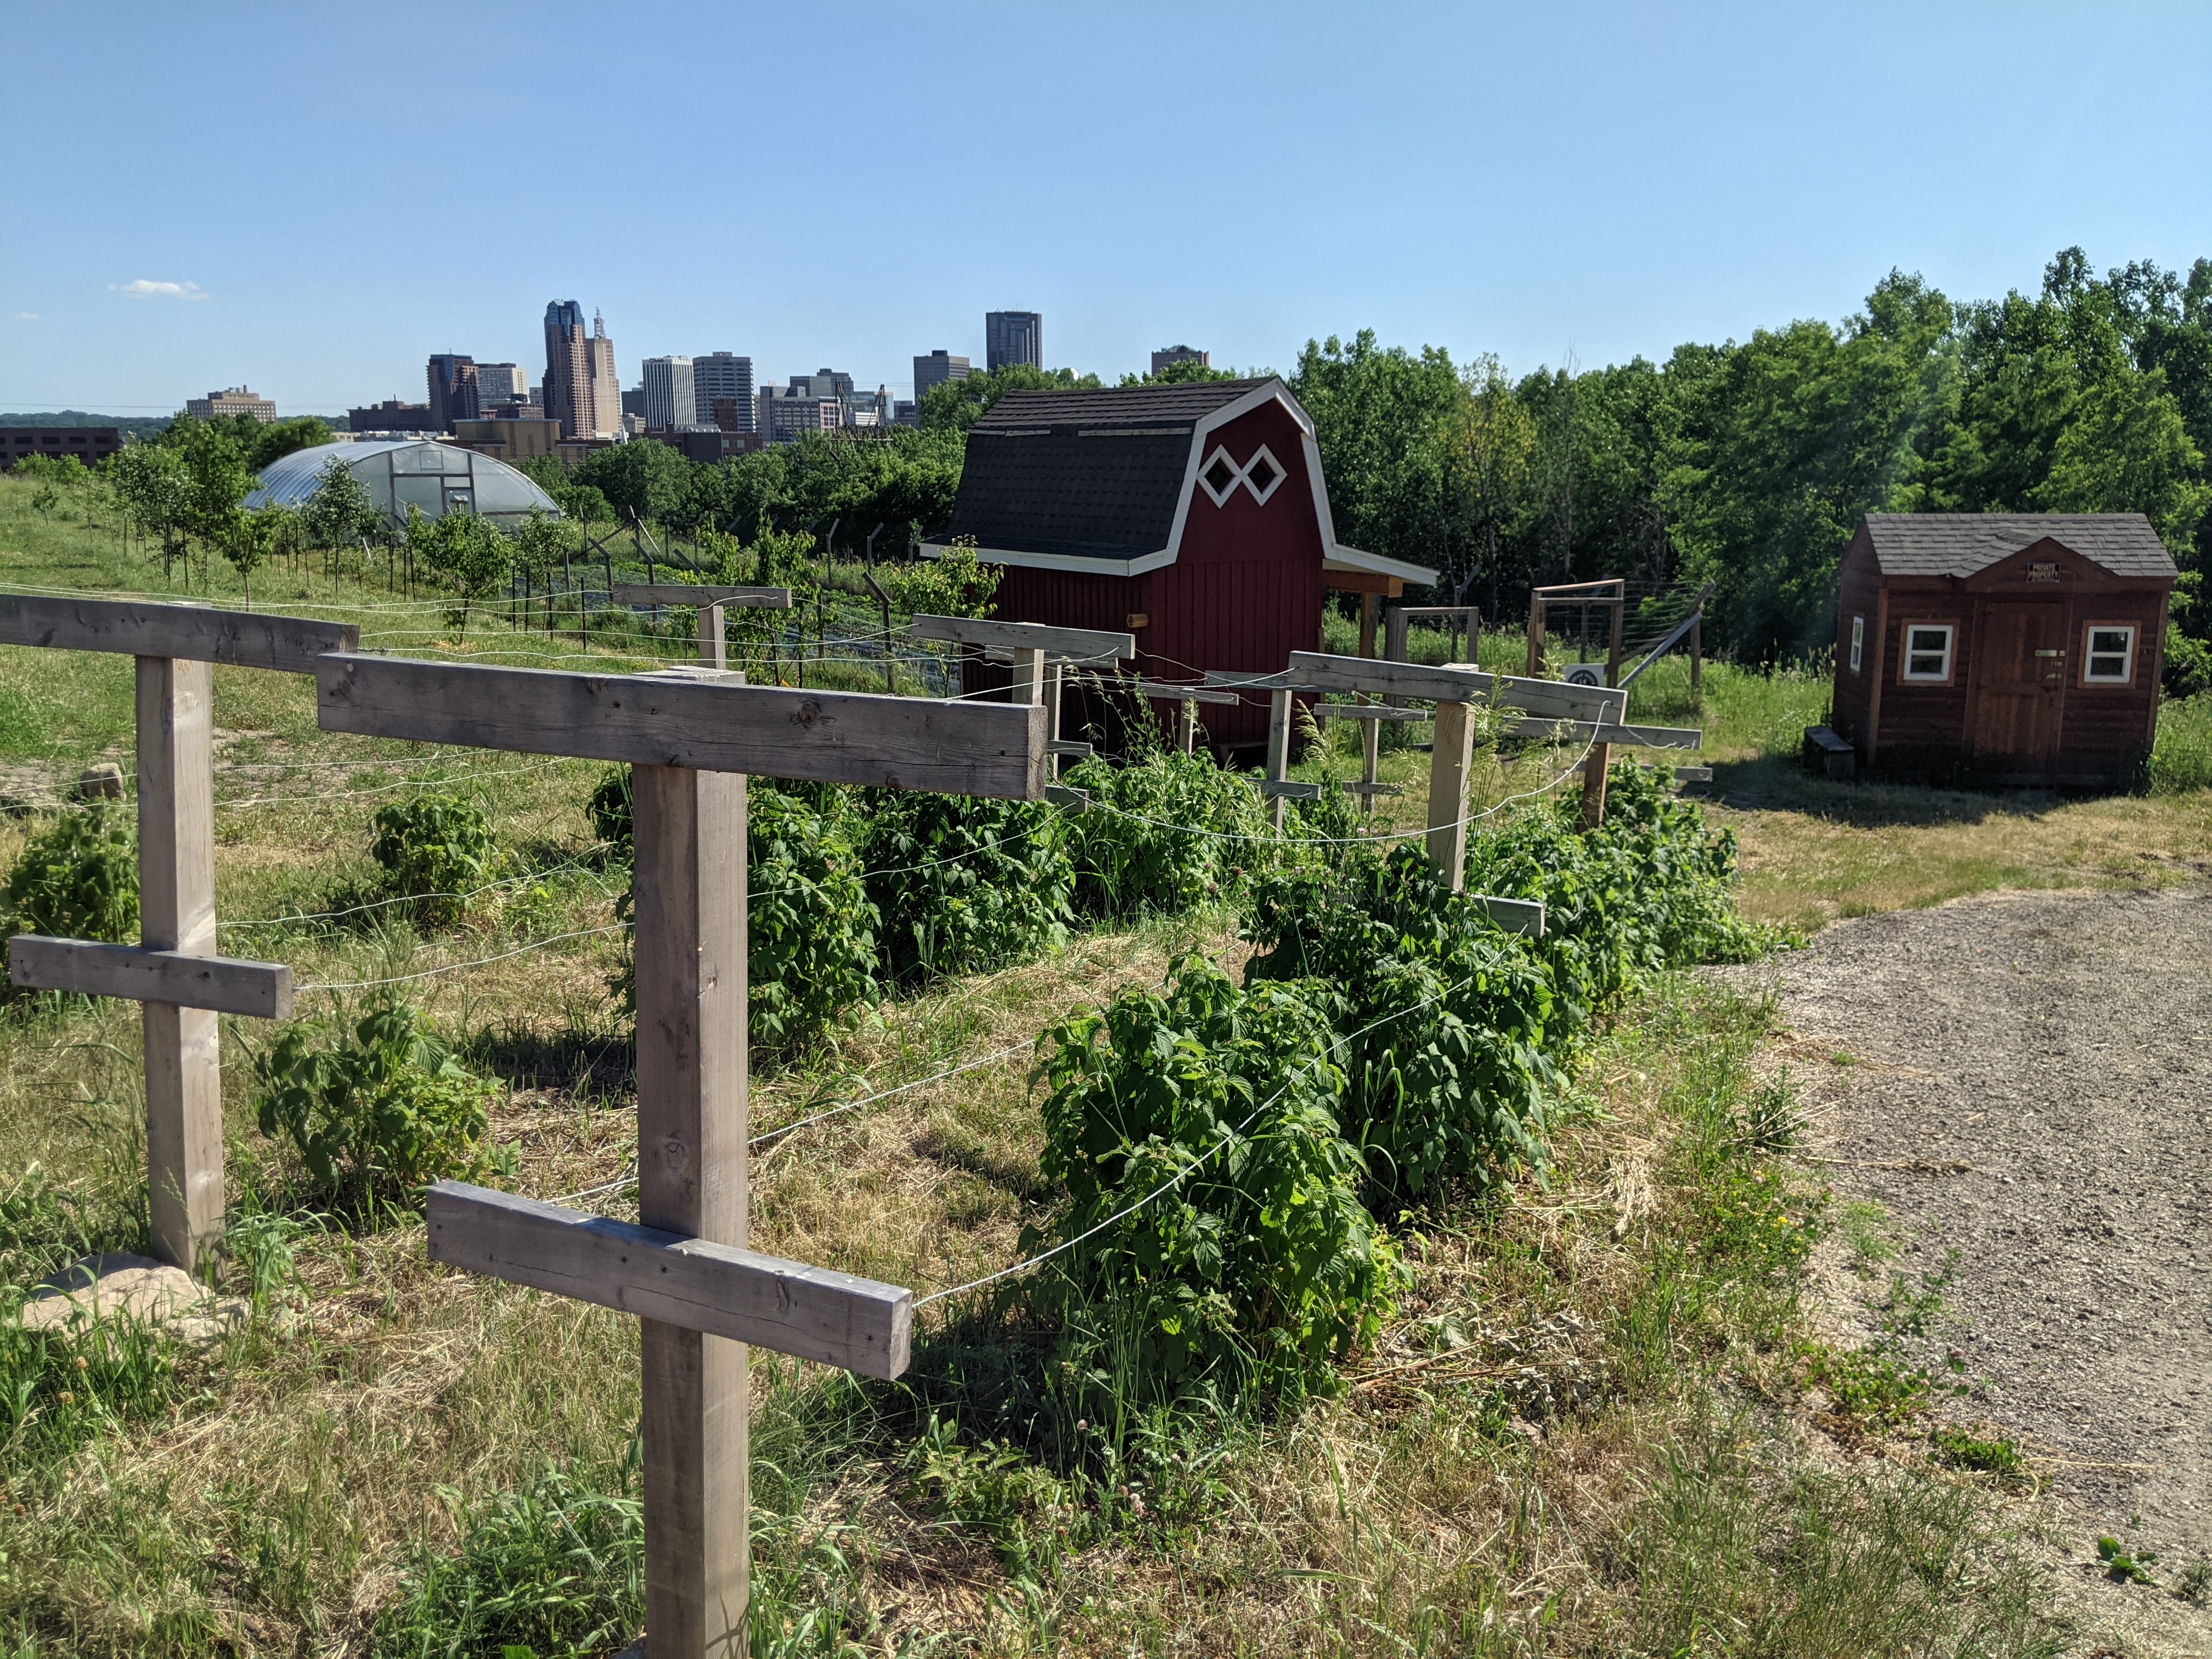 Urban Roots' Rivoli Bluff Farm and Restoration Site with Saint Paul skyline in the background.